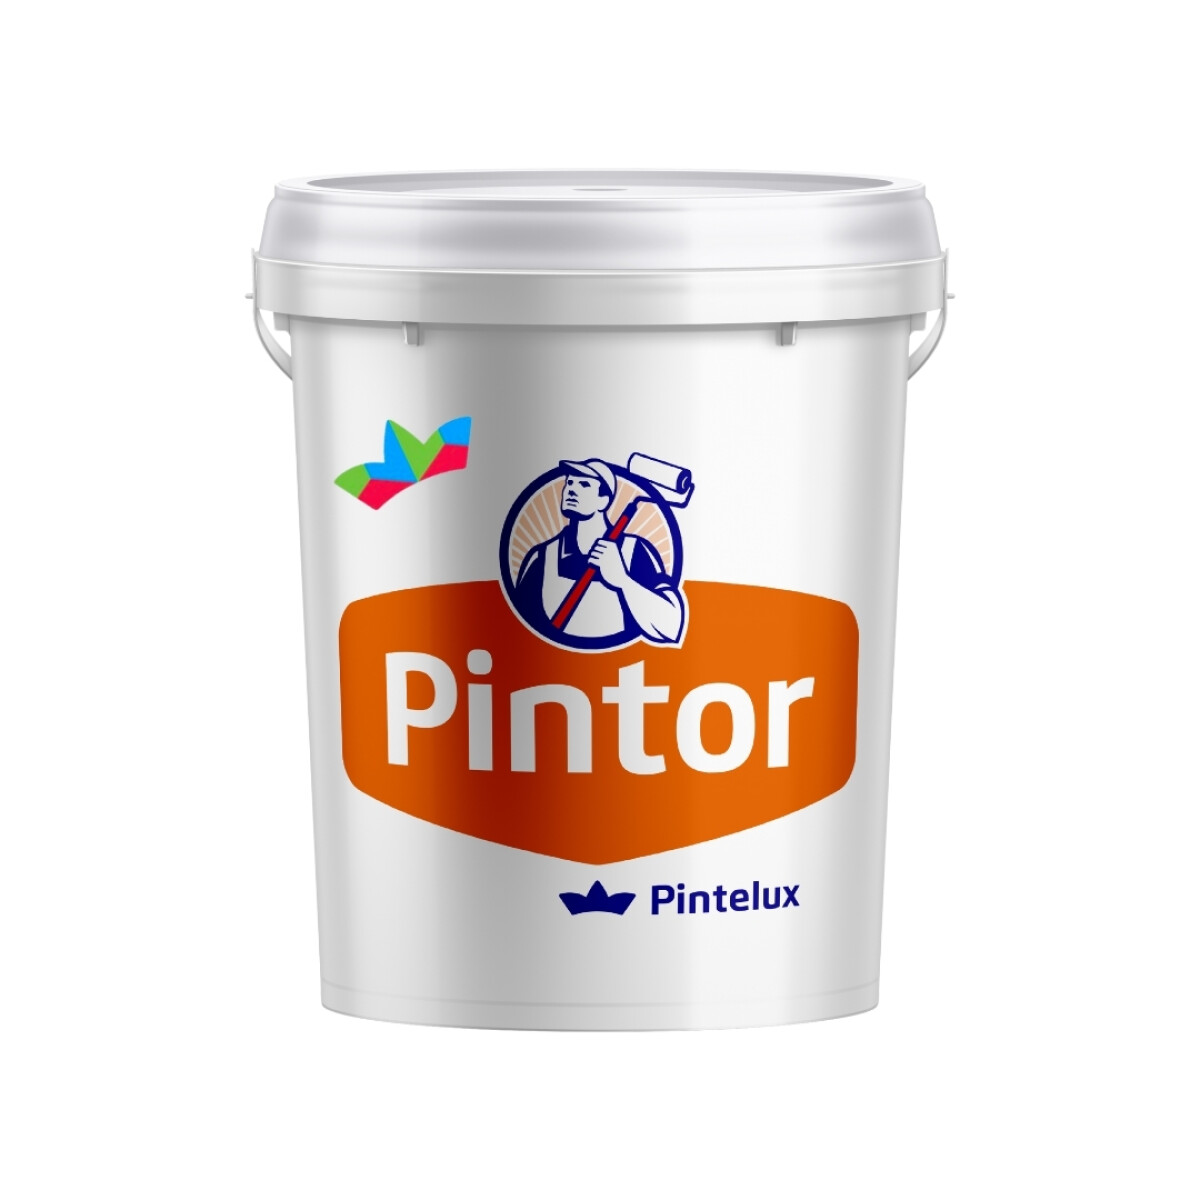 PINTOR MULTIPROPOSITO MONT BLANCO - 3.6LTS 